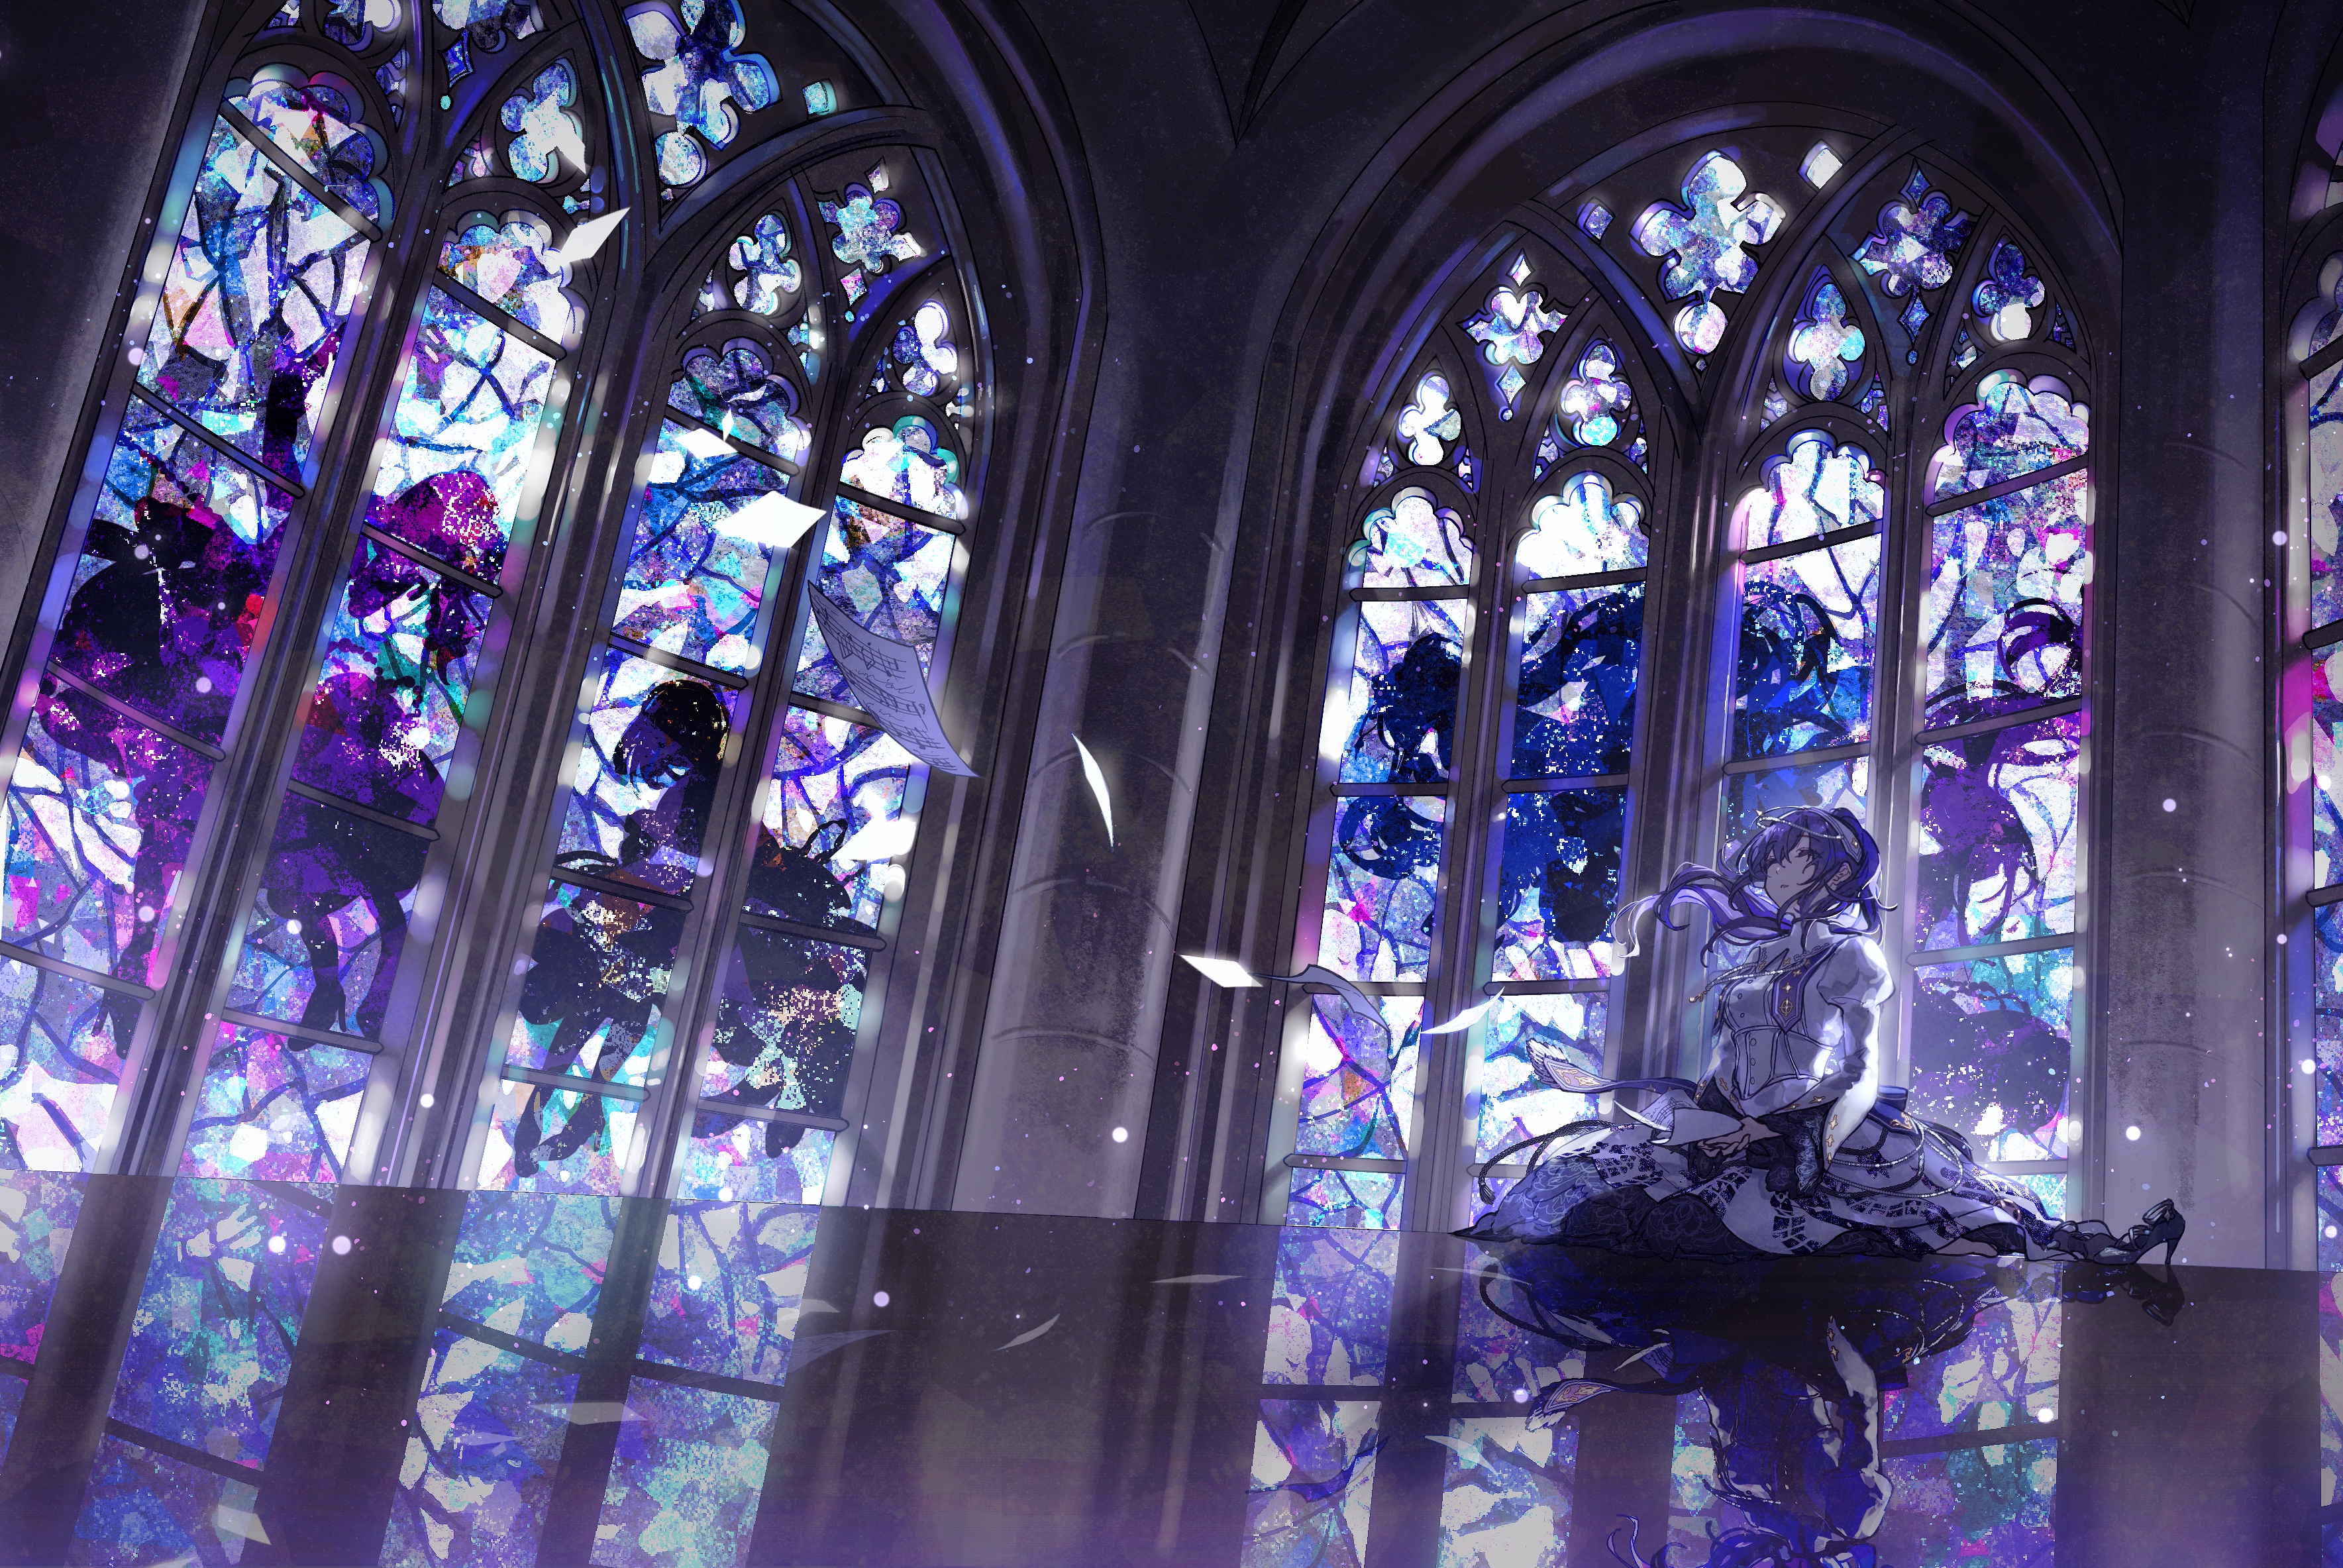 Anime 3537x2367 anime anime girls closed eyes long hair paper reflection stained glass interior dress musical notes kneeling necklace hair blowing in the wind wind